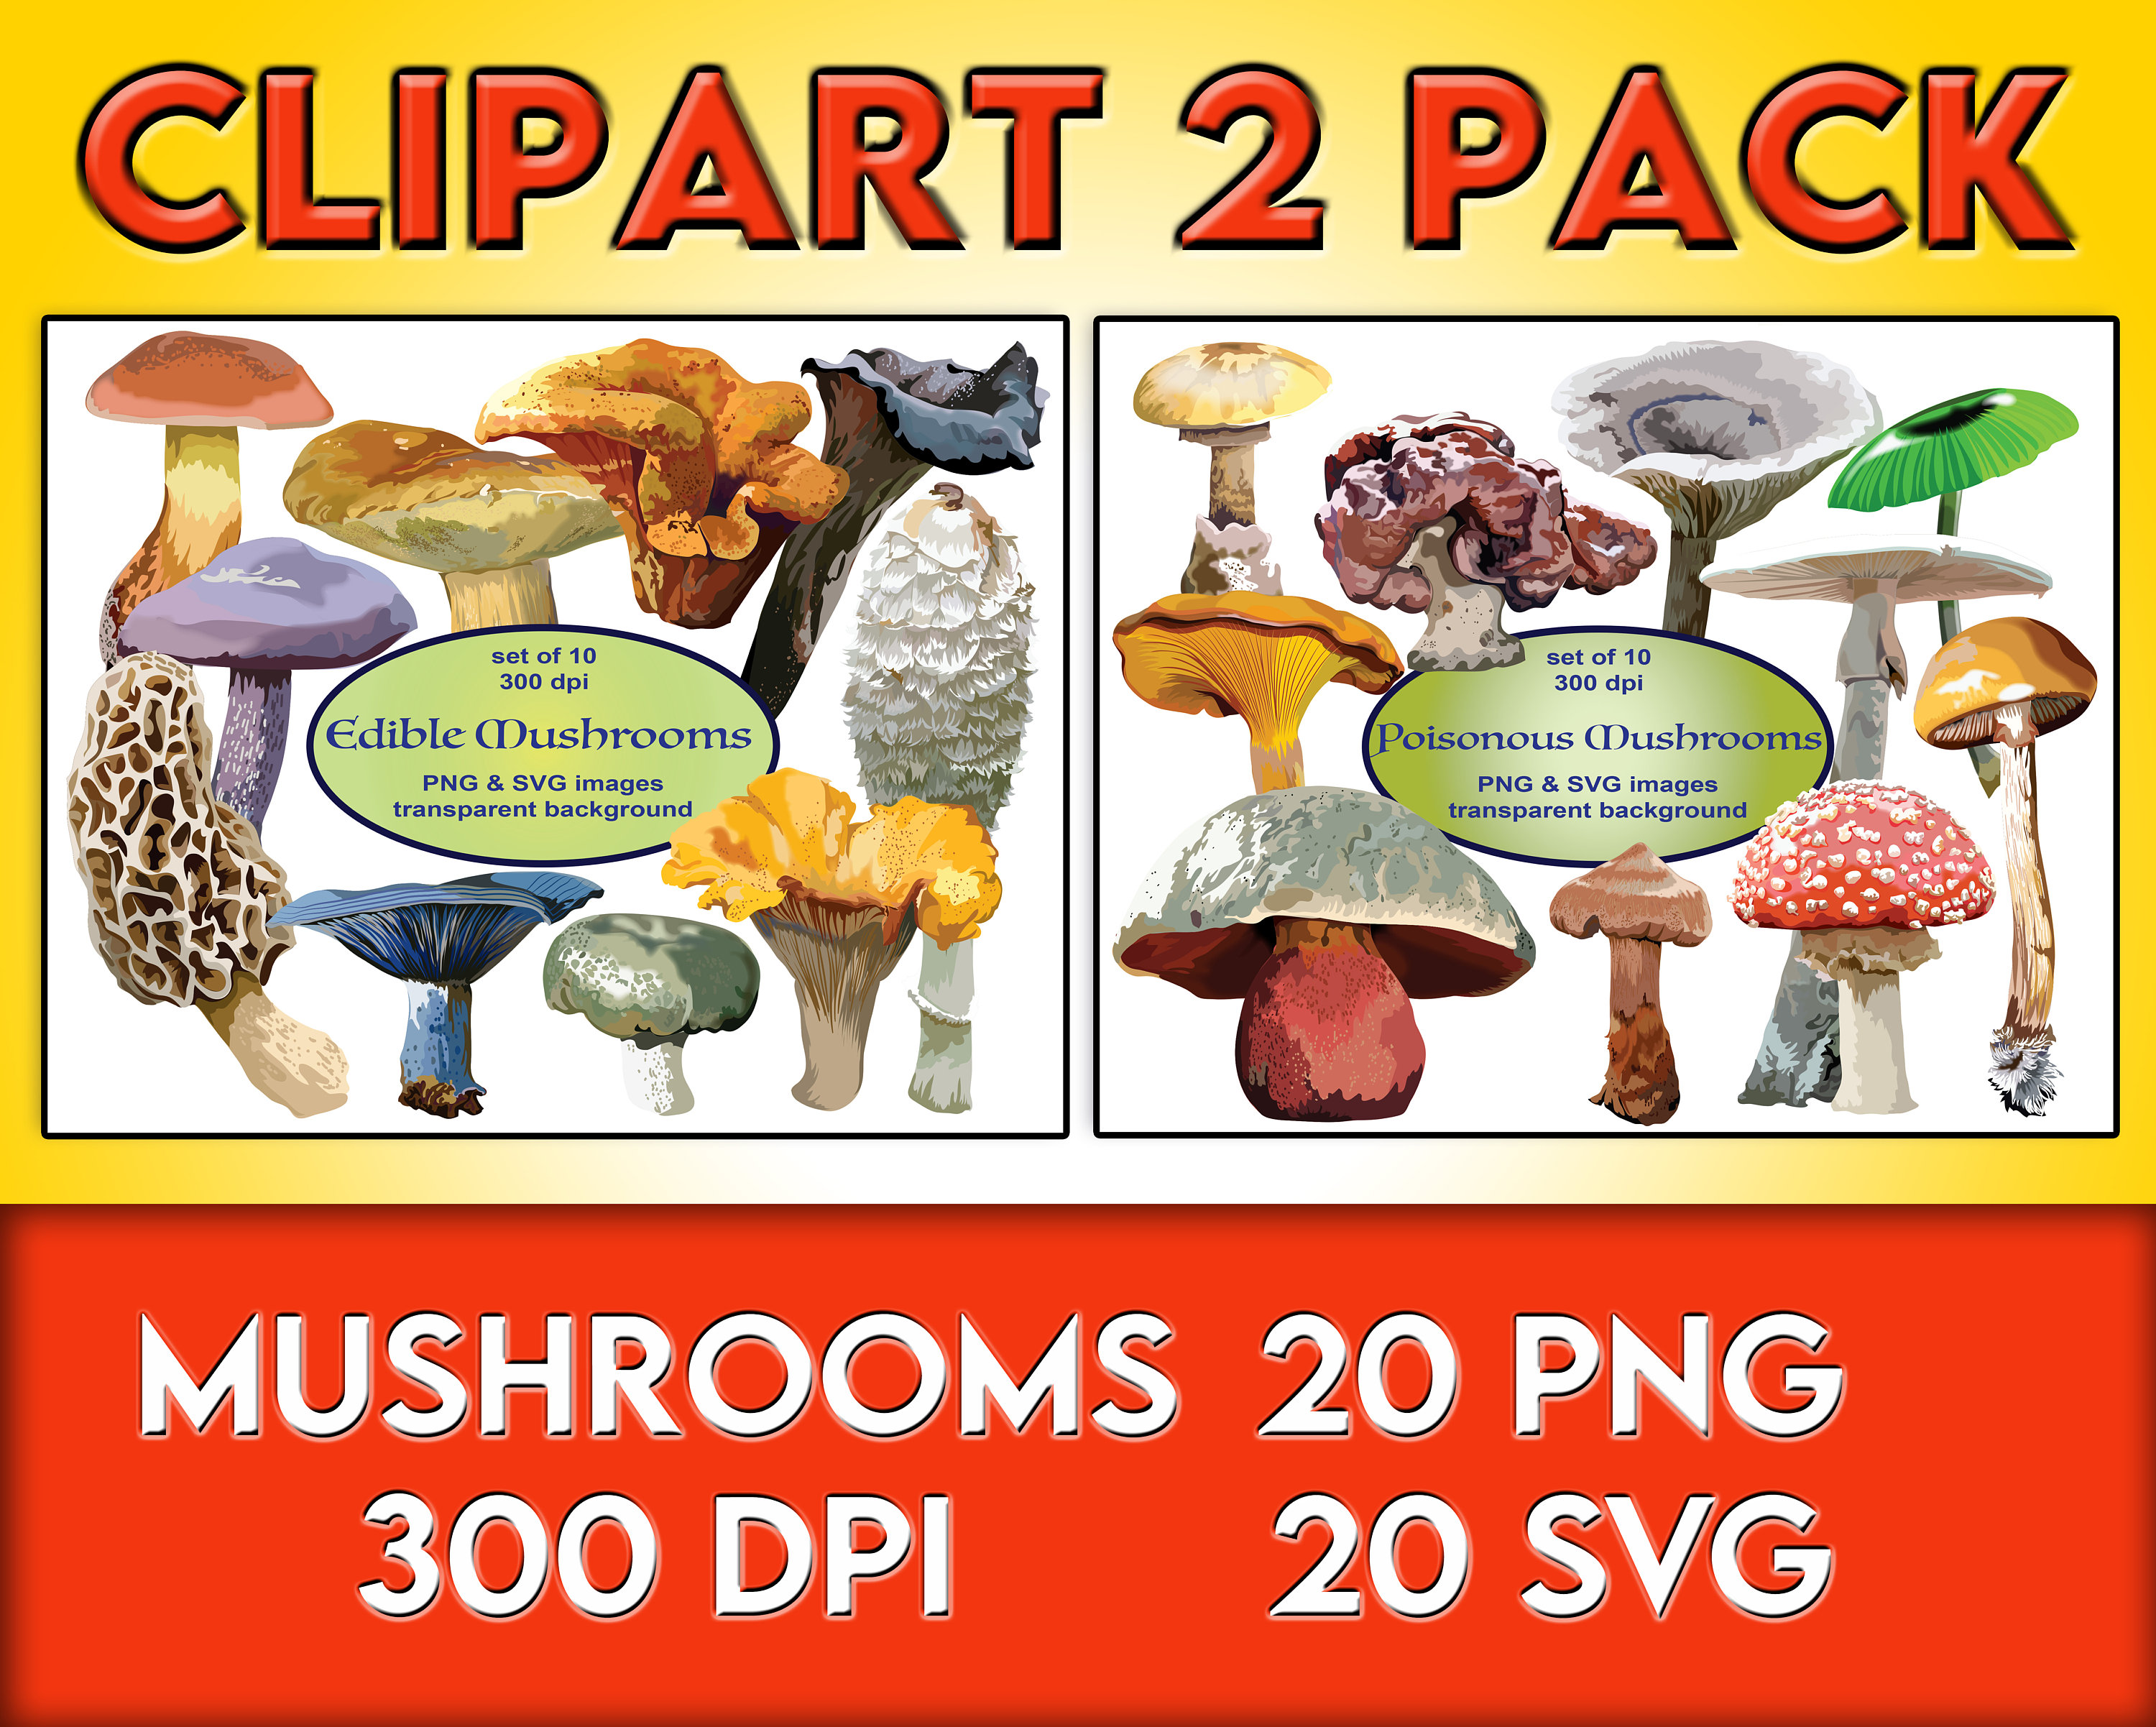 poisonous mushroom images and clipart